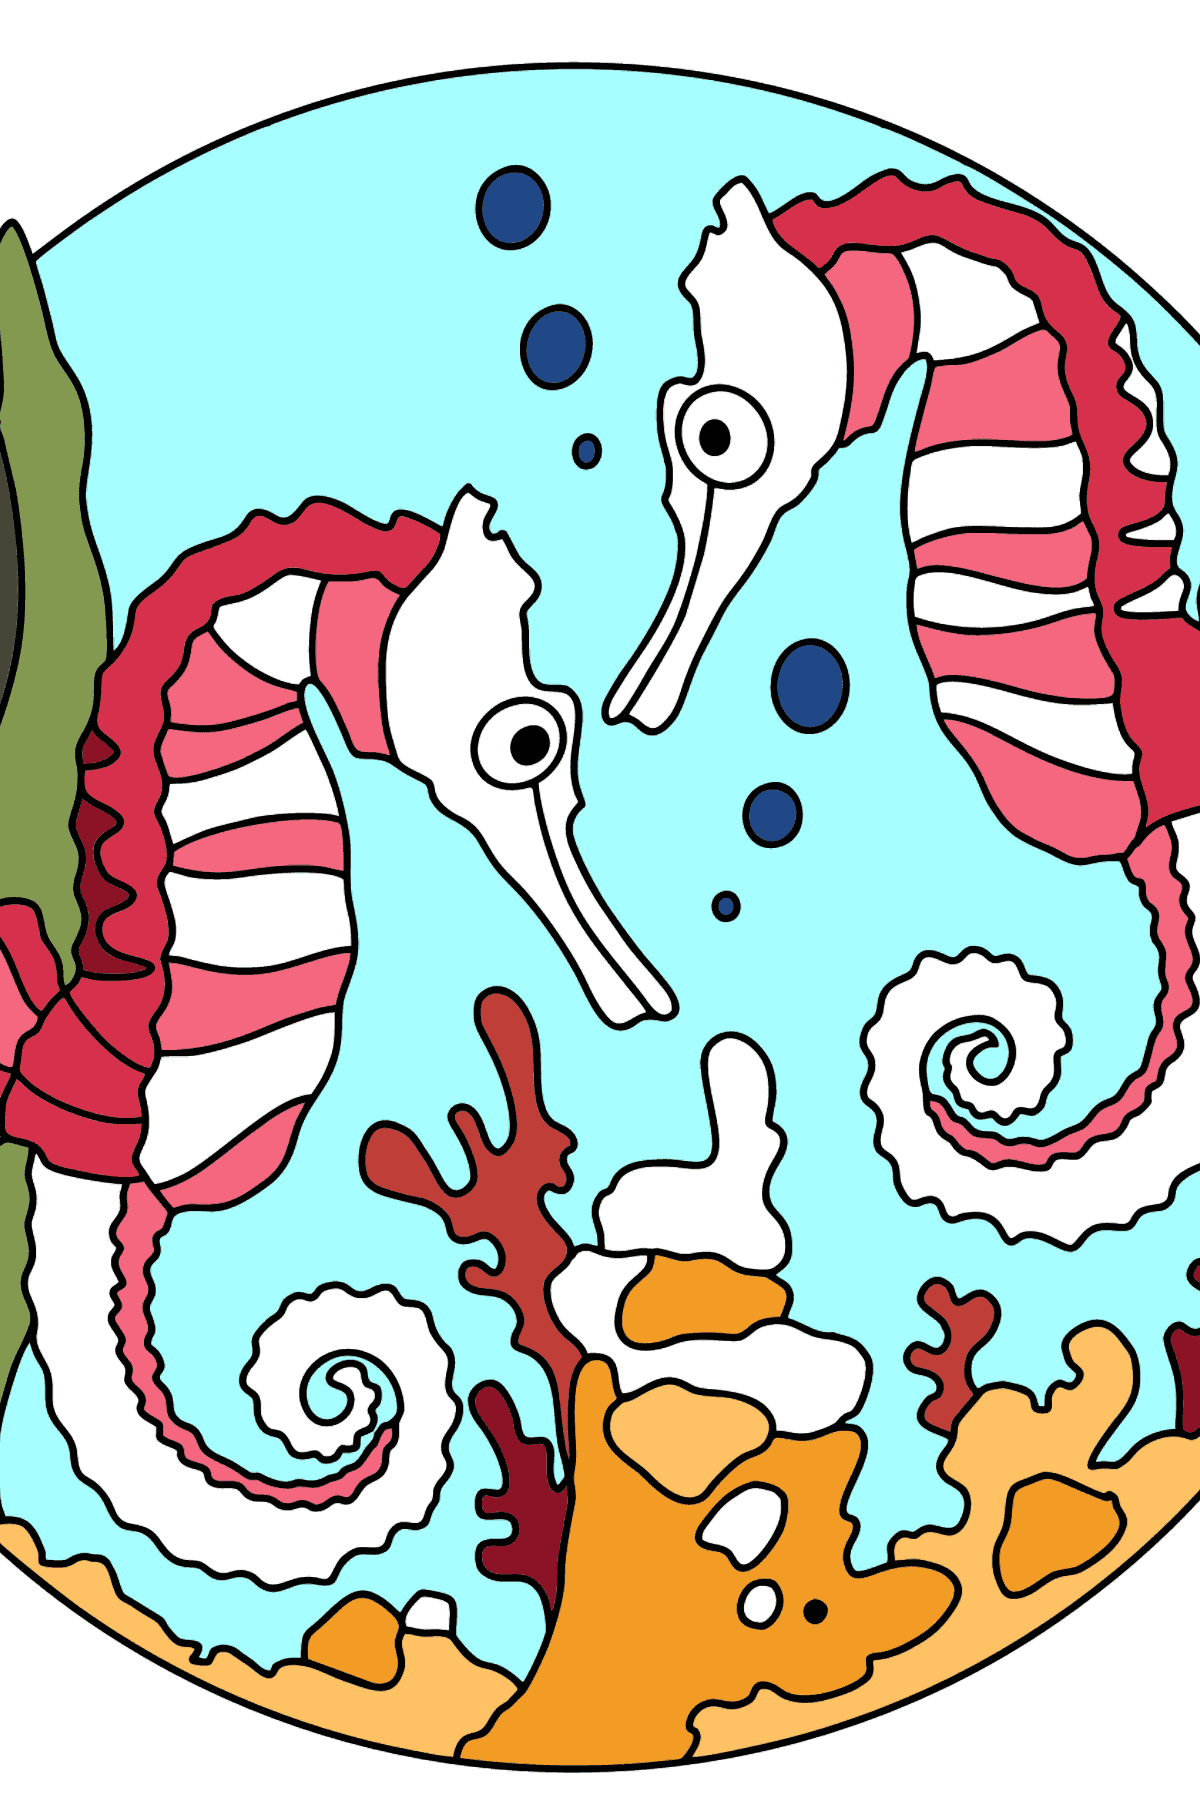 Seahorses Coloring Page - Coloring Pages for Kids